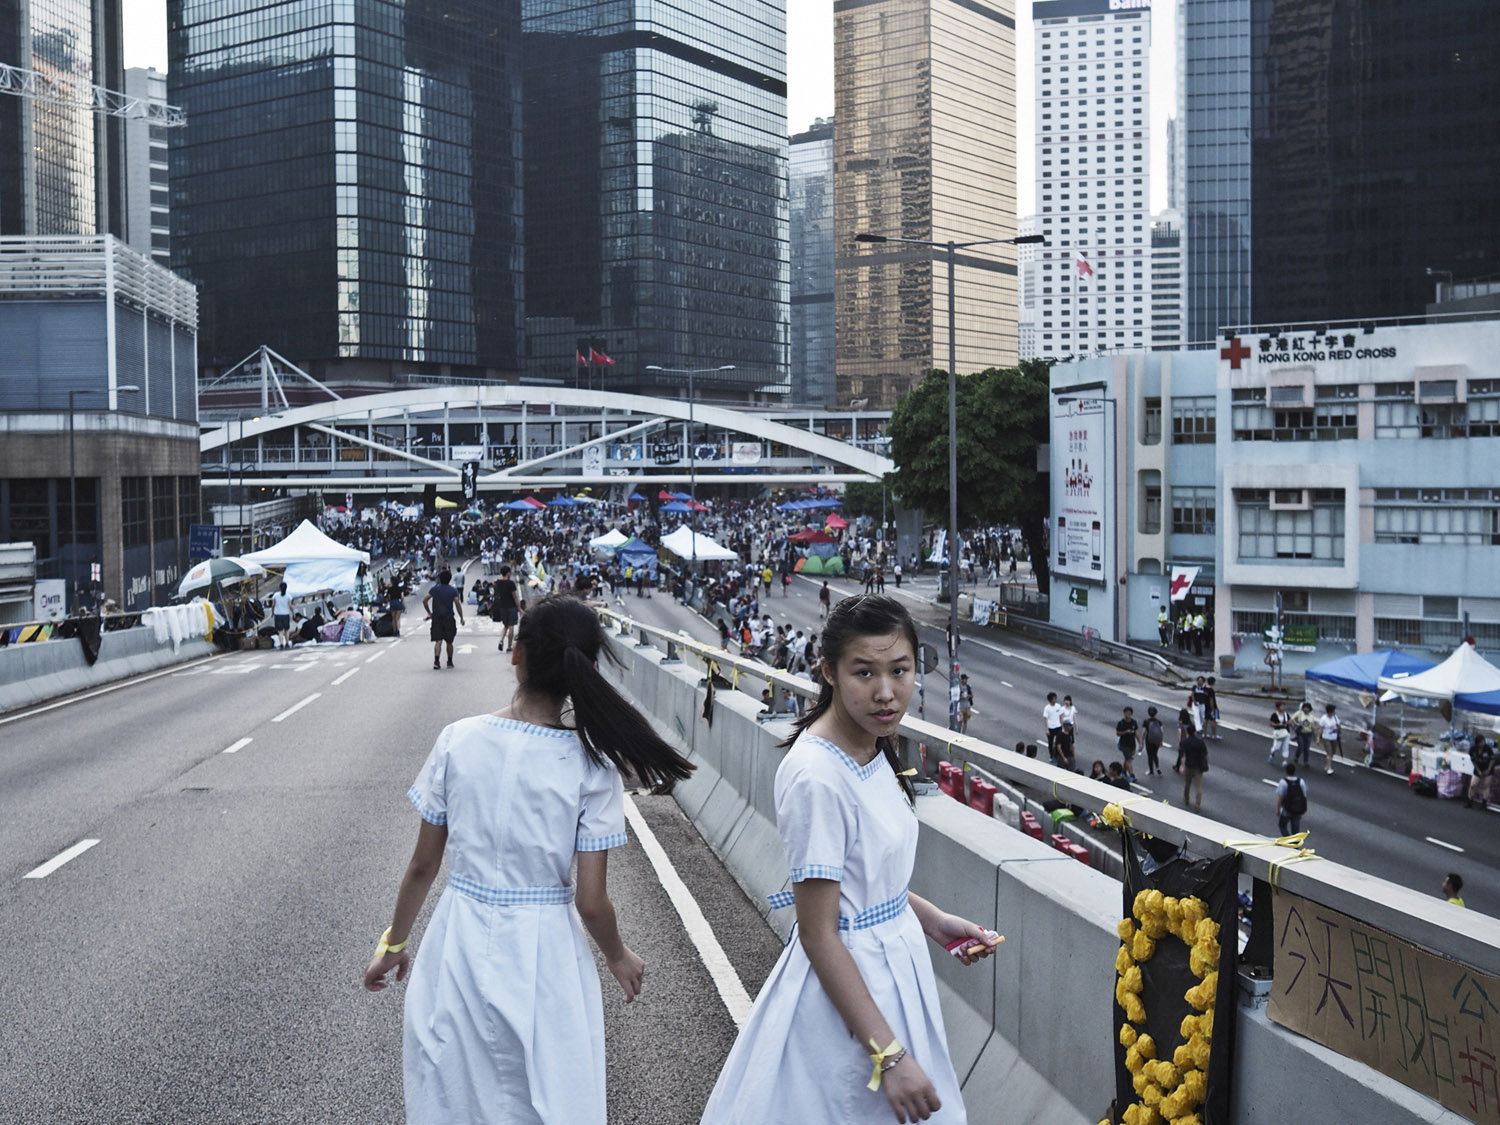 Pro-democracy student protestors stand near the office of Hong Kong's Chief Executive in Admiralty, Oct. 3, 2014.